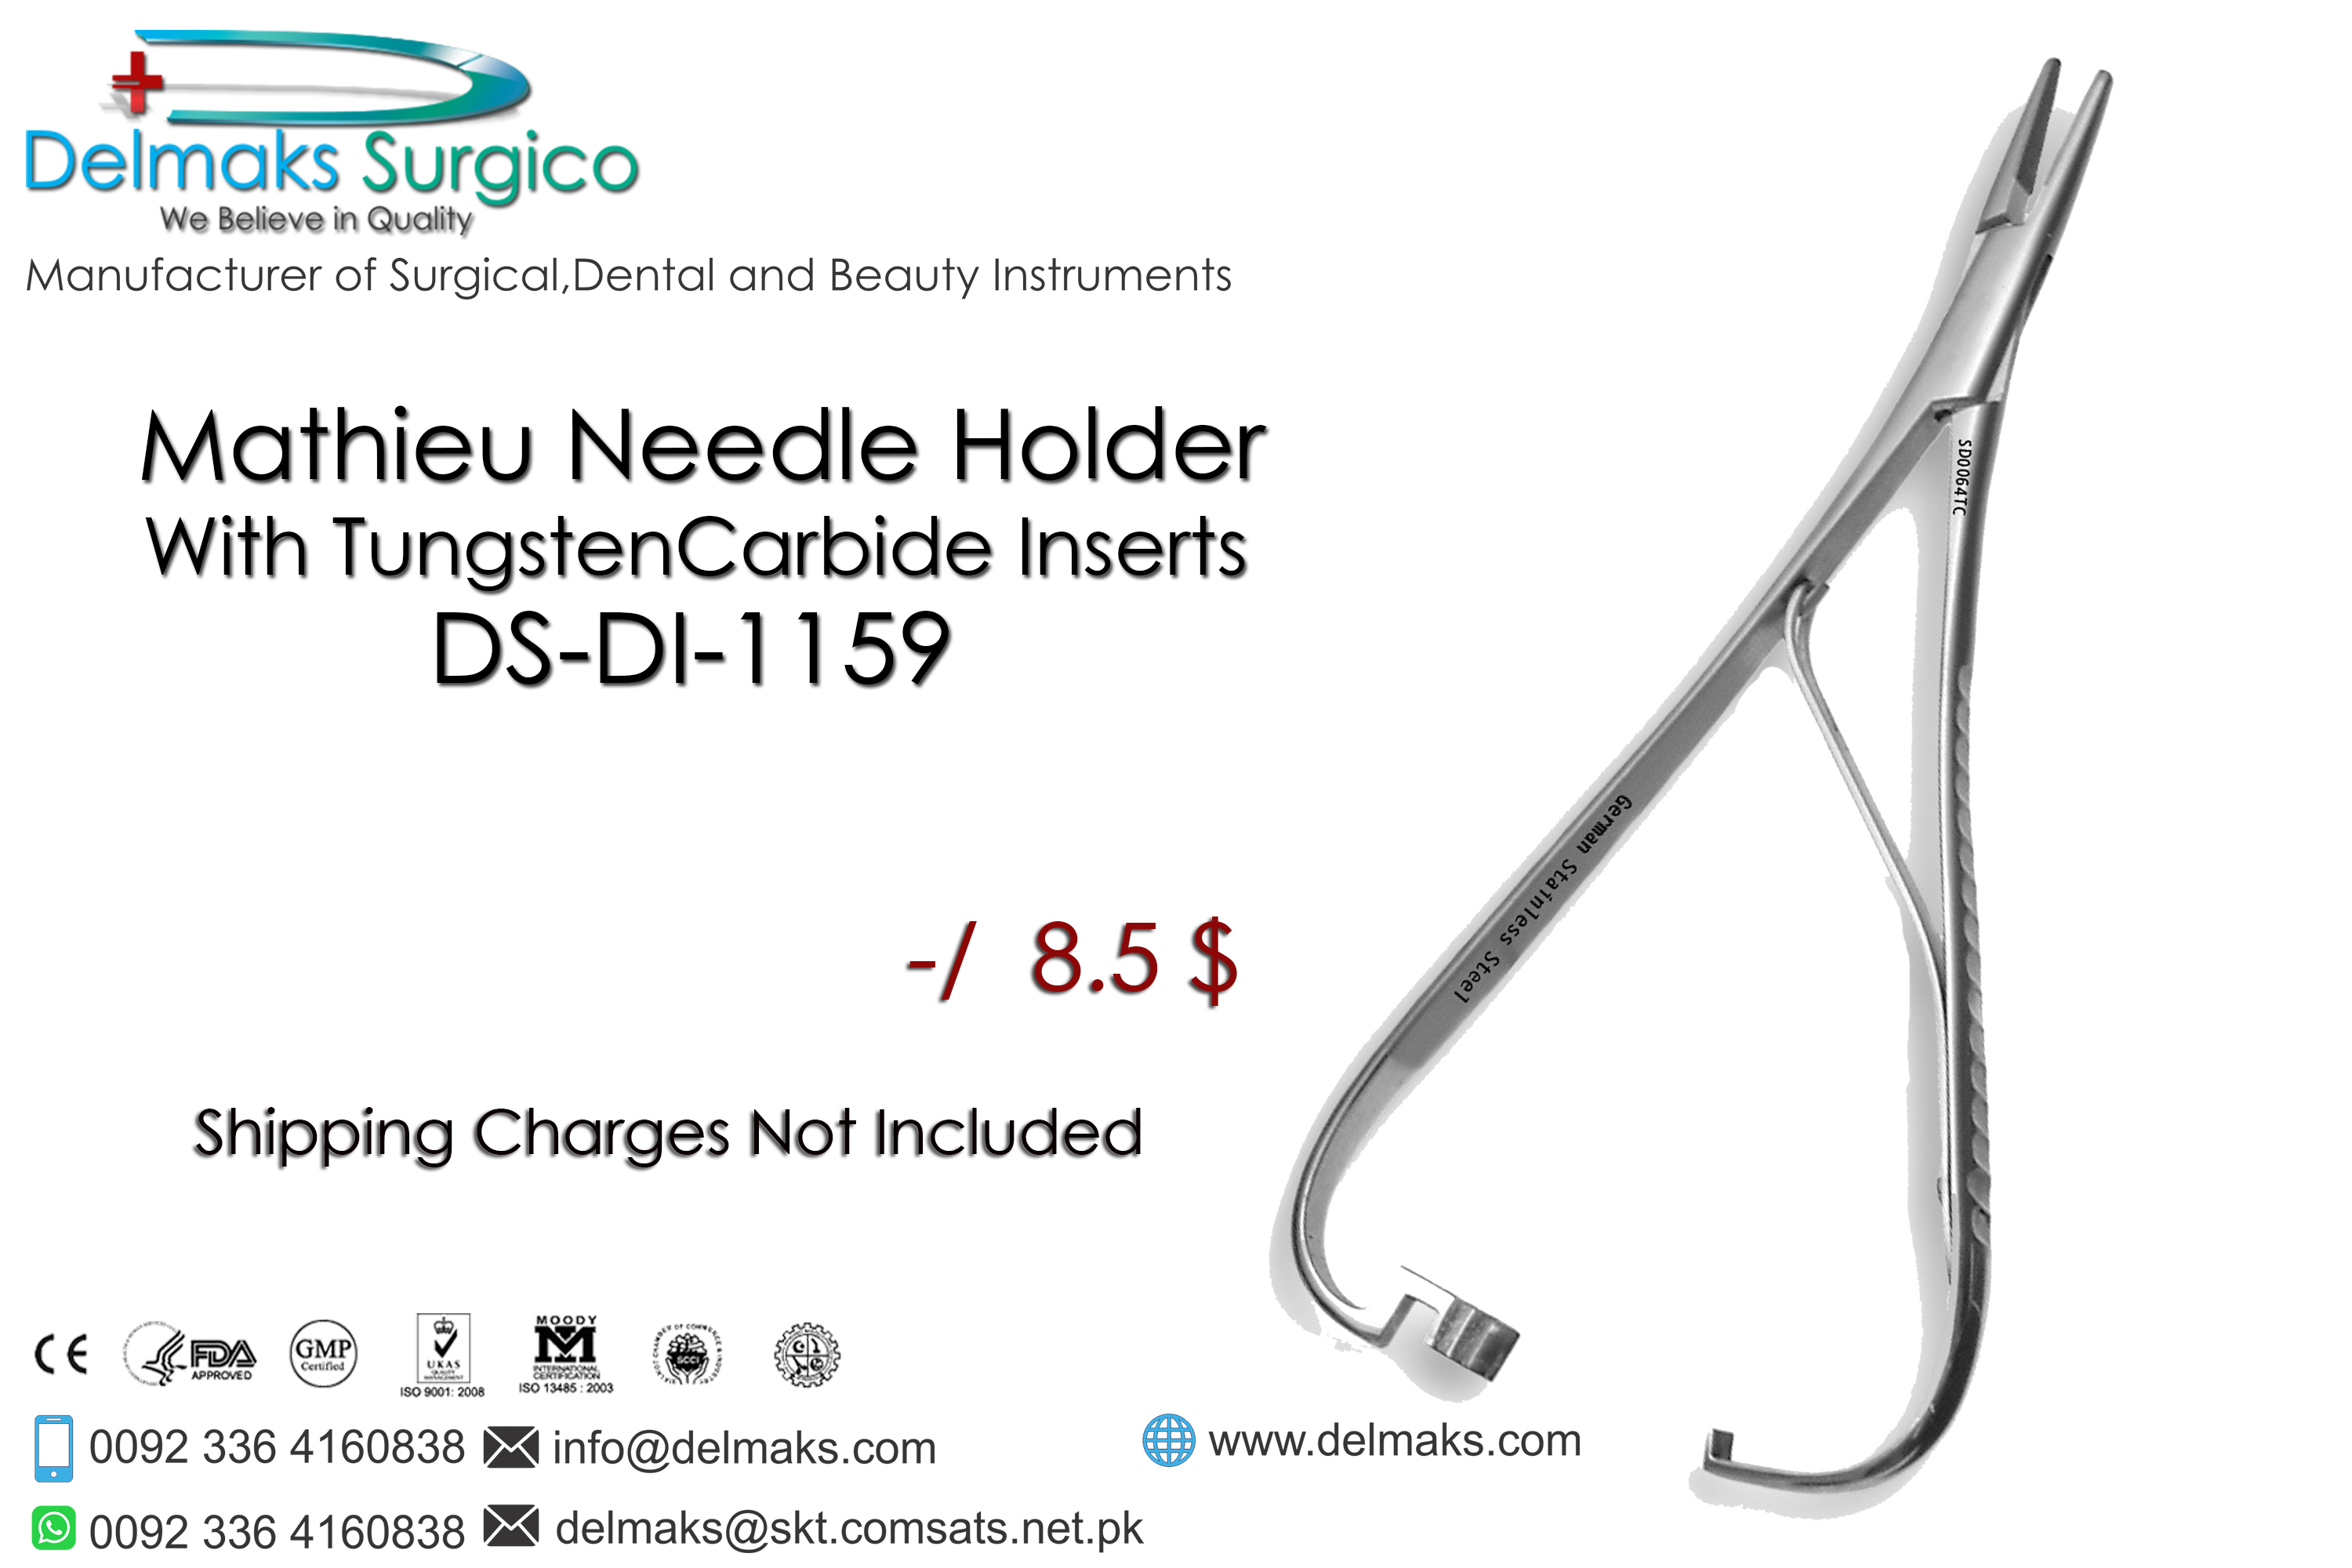 Mathieu Needle Holder With Tungsten Carbide Inserts-Needle Holders-Dental Instruments-Delmaks Surgico